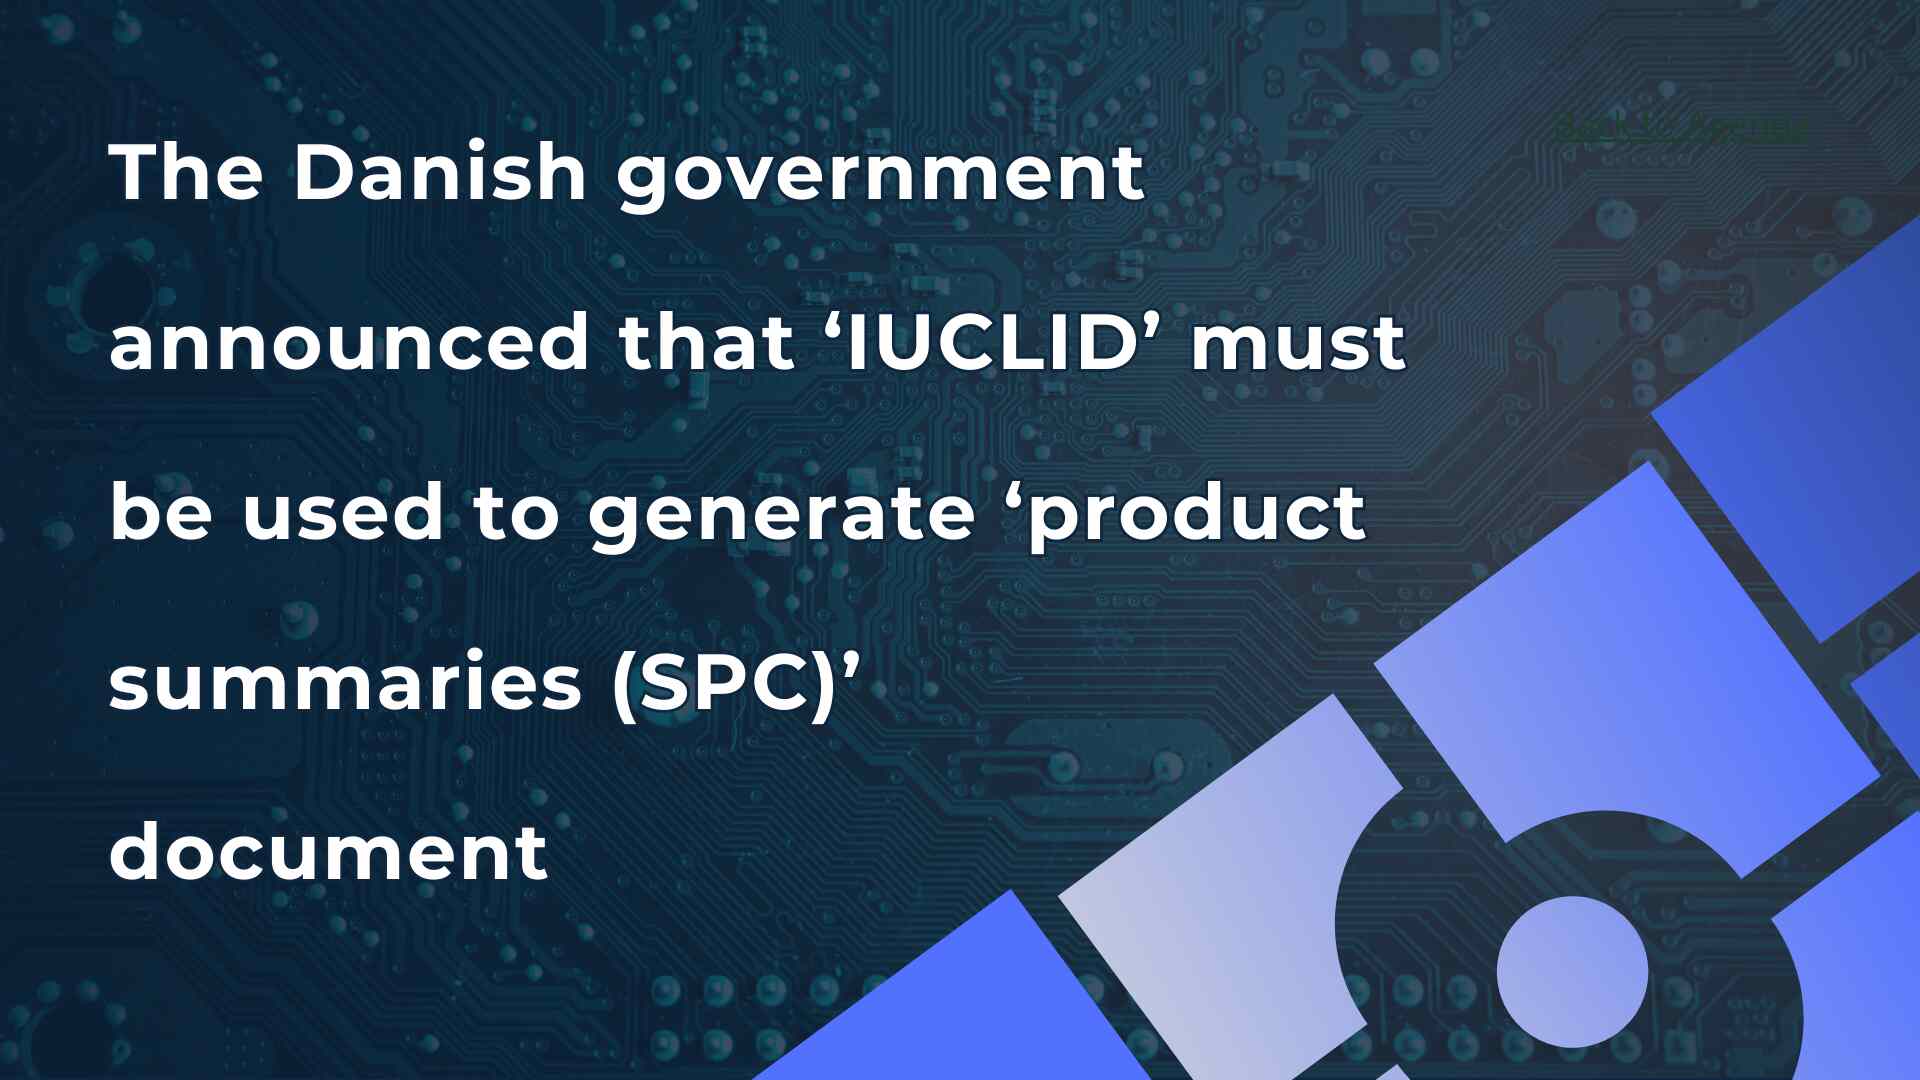 THE DANISH GOVERNMENT ANNOUNCED THAT IUCLID MUST BE USED TO GENERATE PRODUCT SUMMARIES